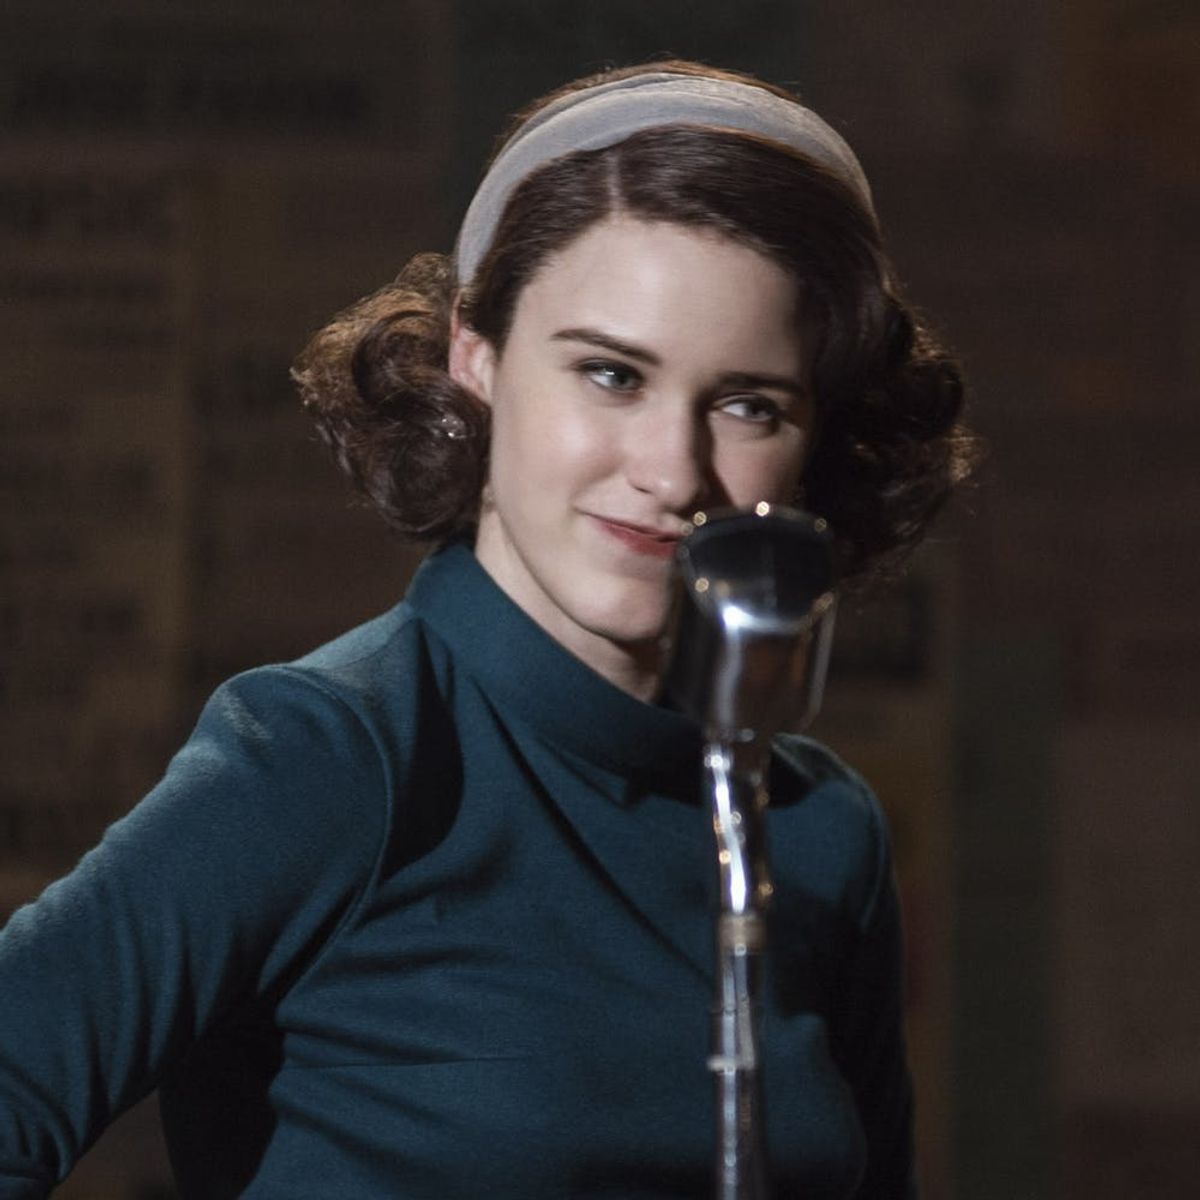 ‘The Marvelous Mrs. Maisel’ Is Just as Marvelous as Ever in This Season 2 Trailer